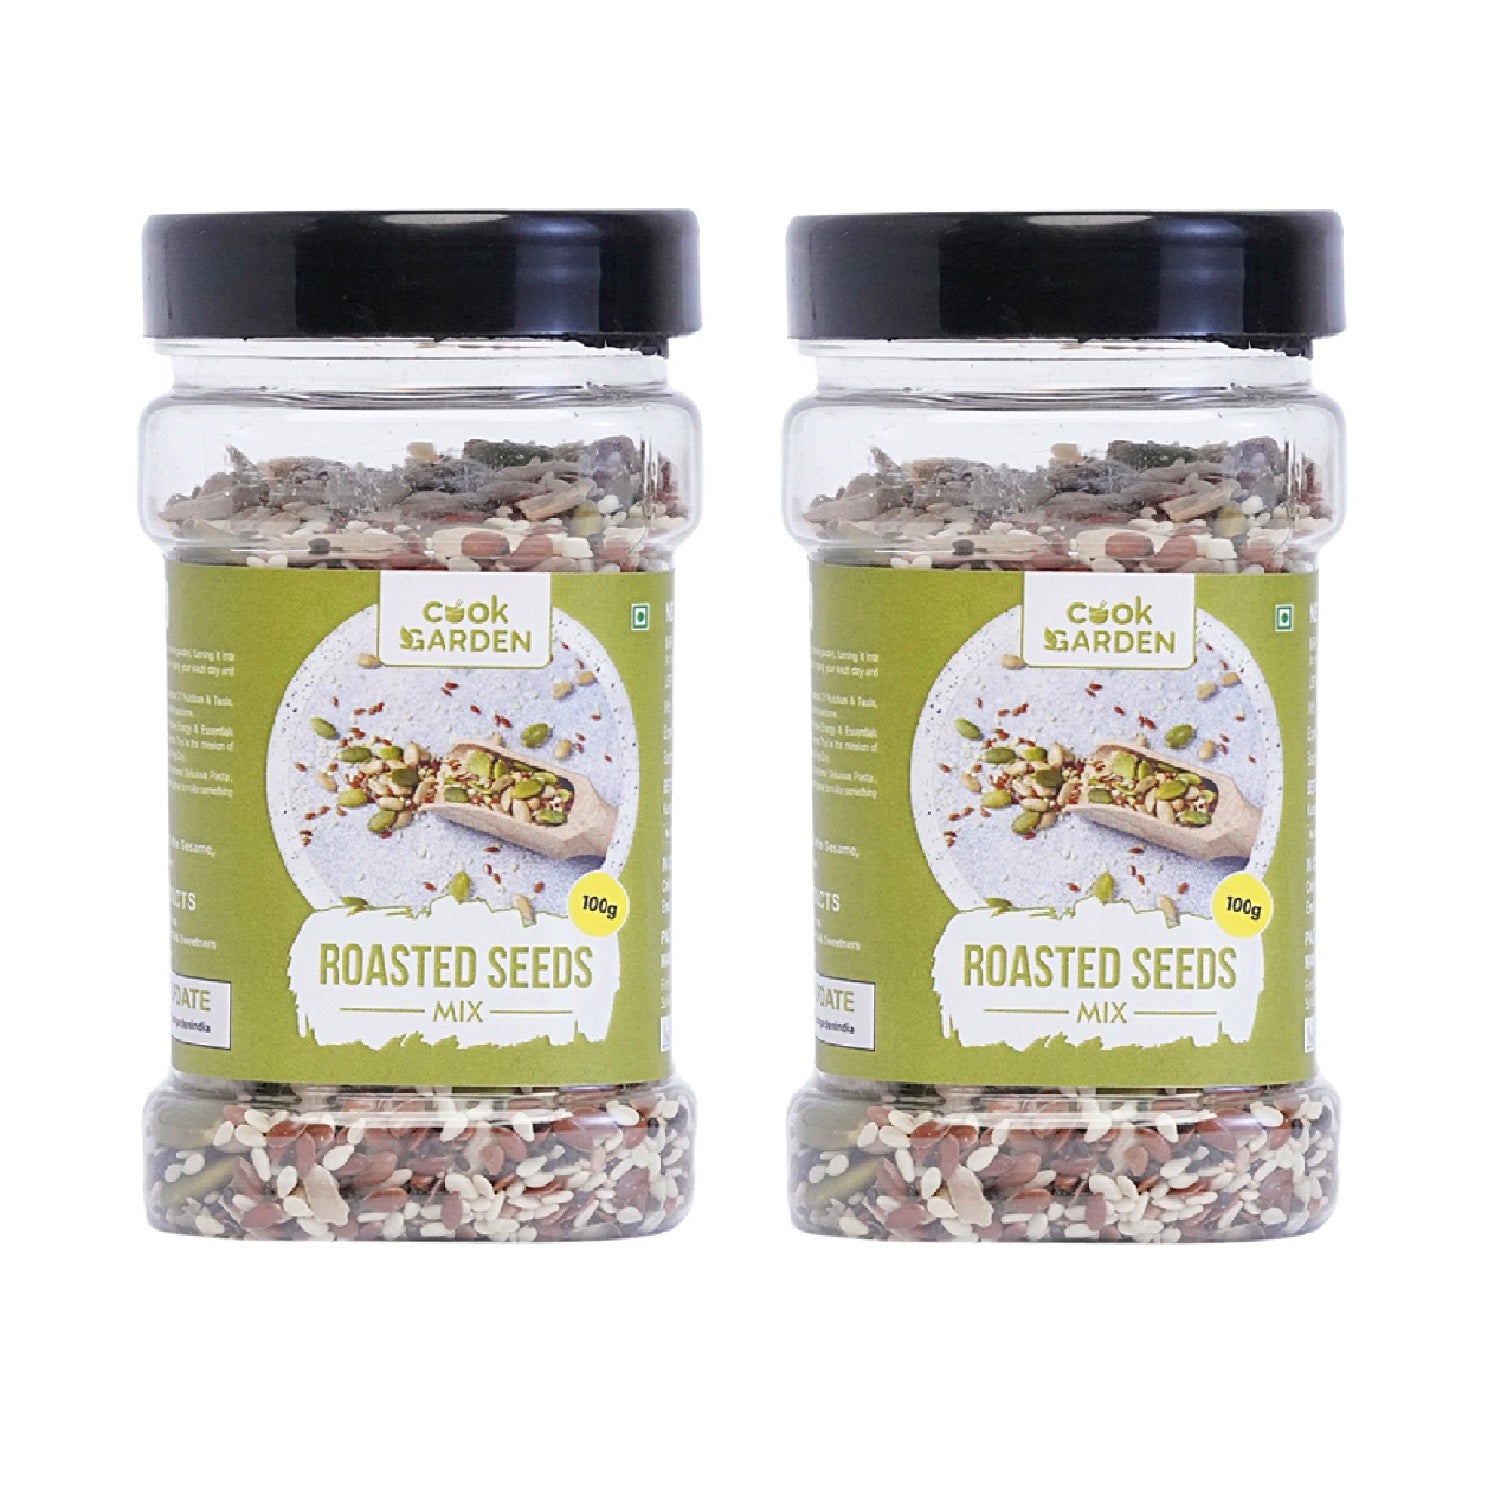 Cook Garden Premium Roasted Seeds 200gm (Pack of 2)